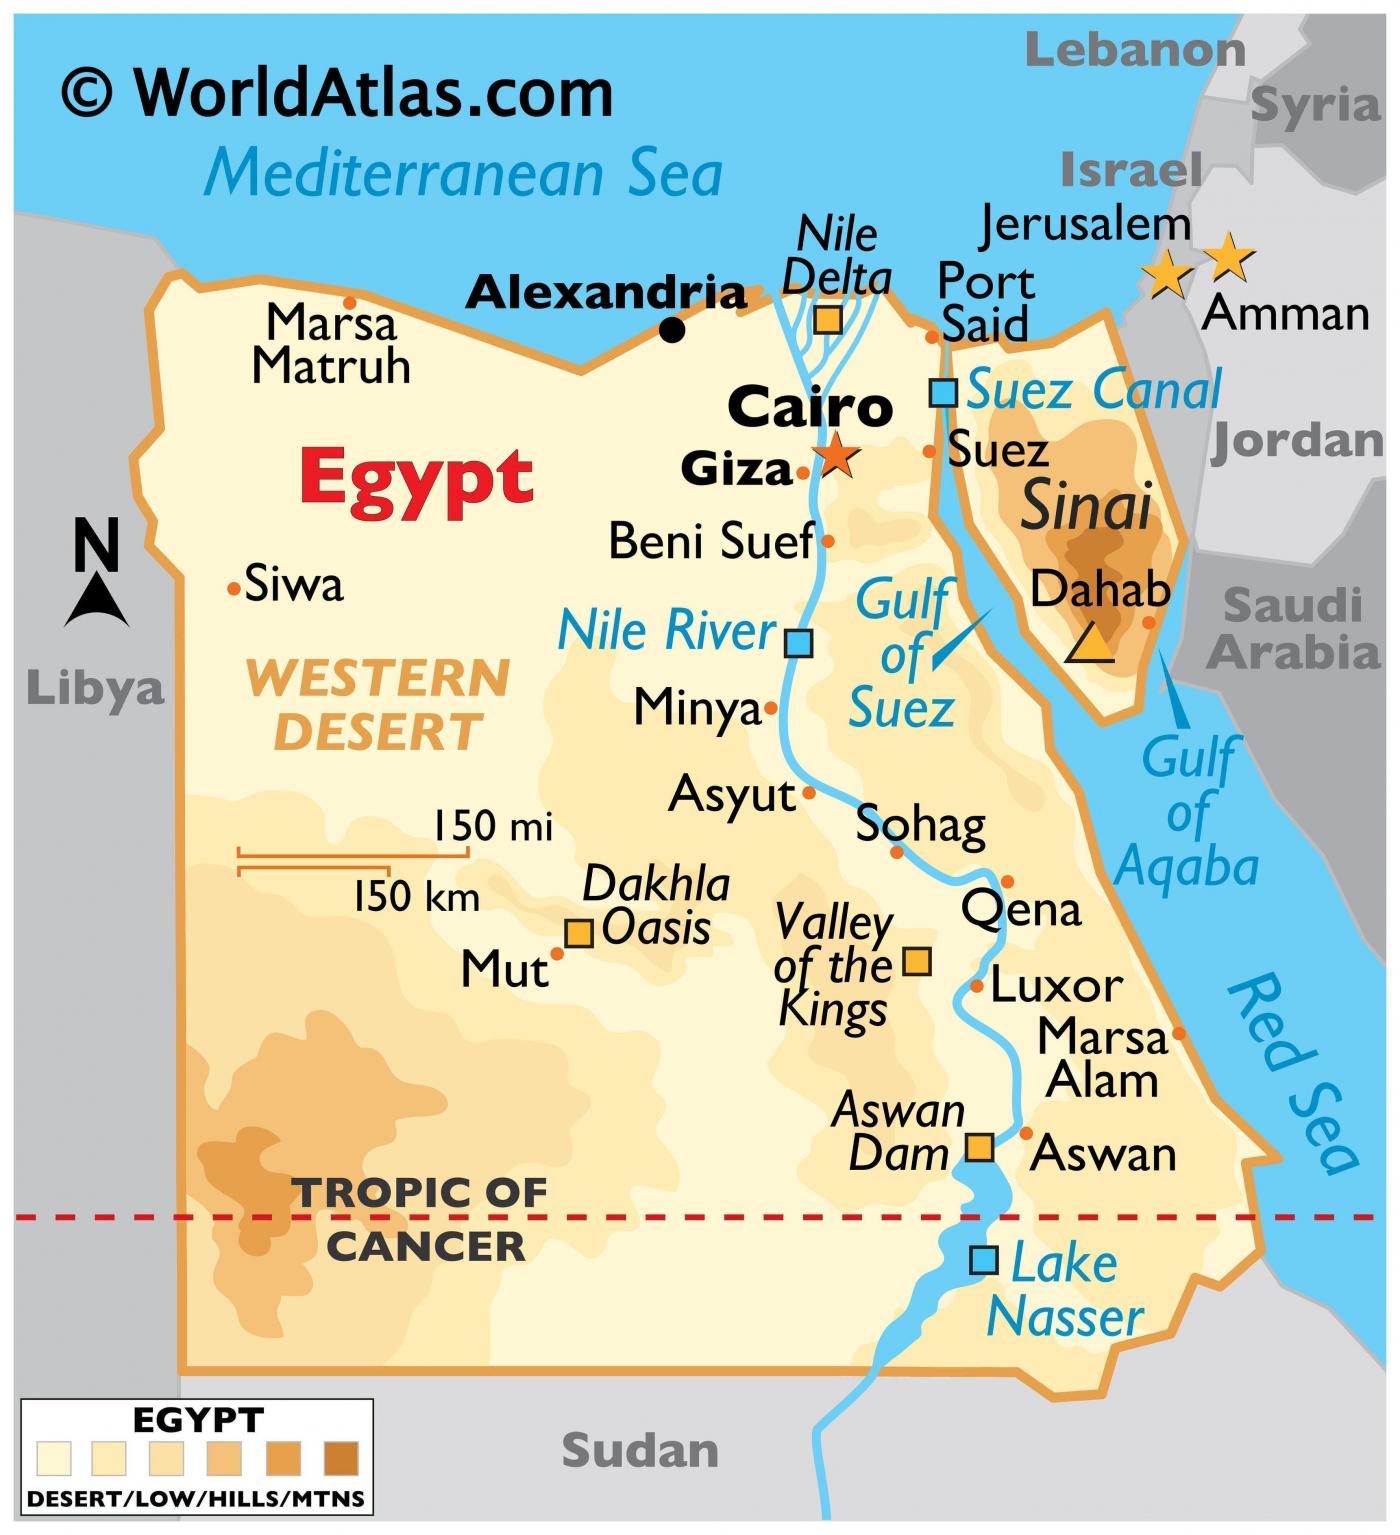 A map of Egypt, showing the different regions of the country